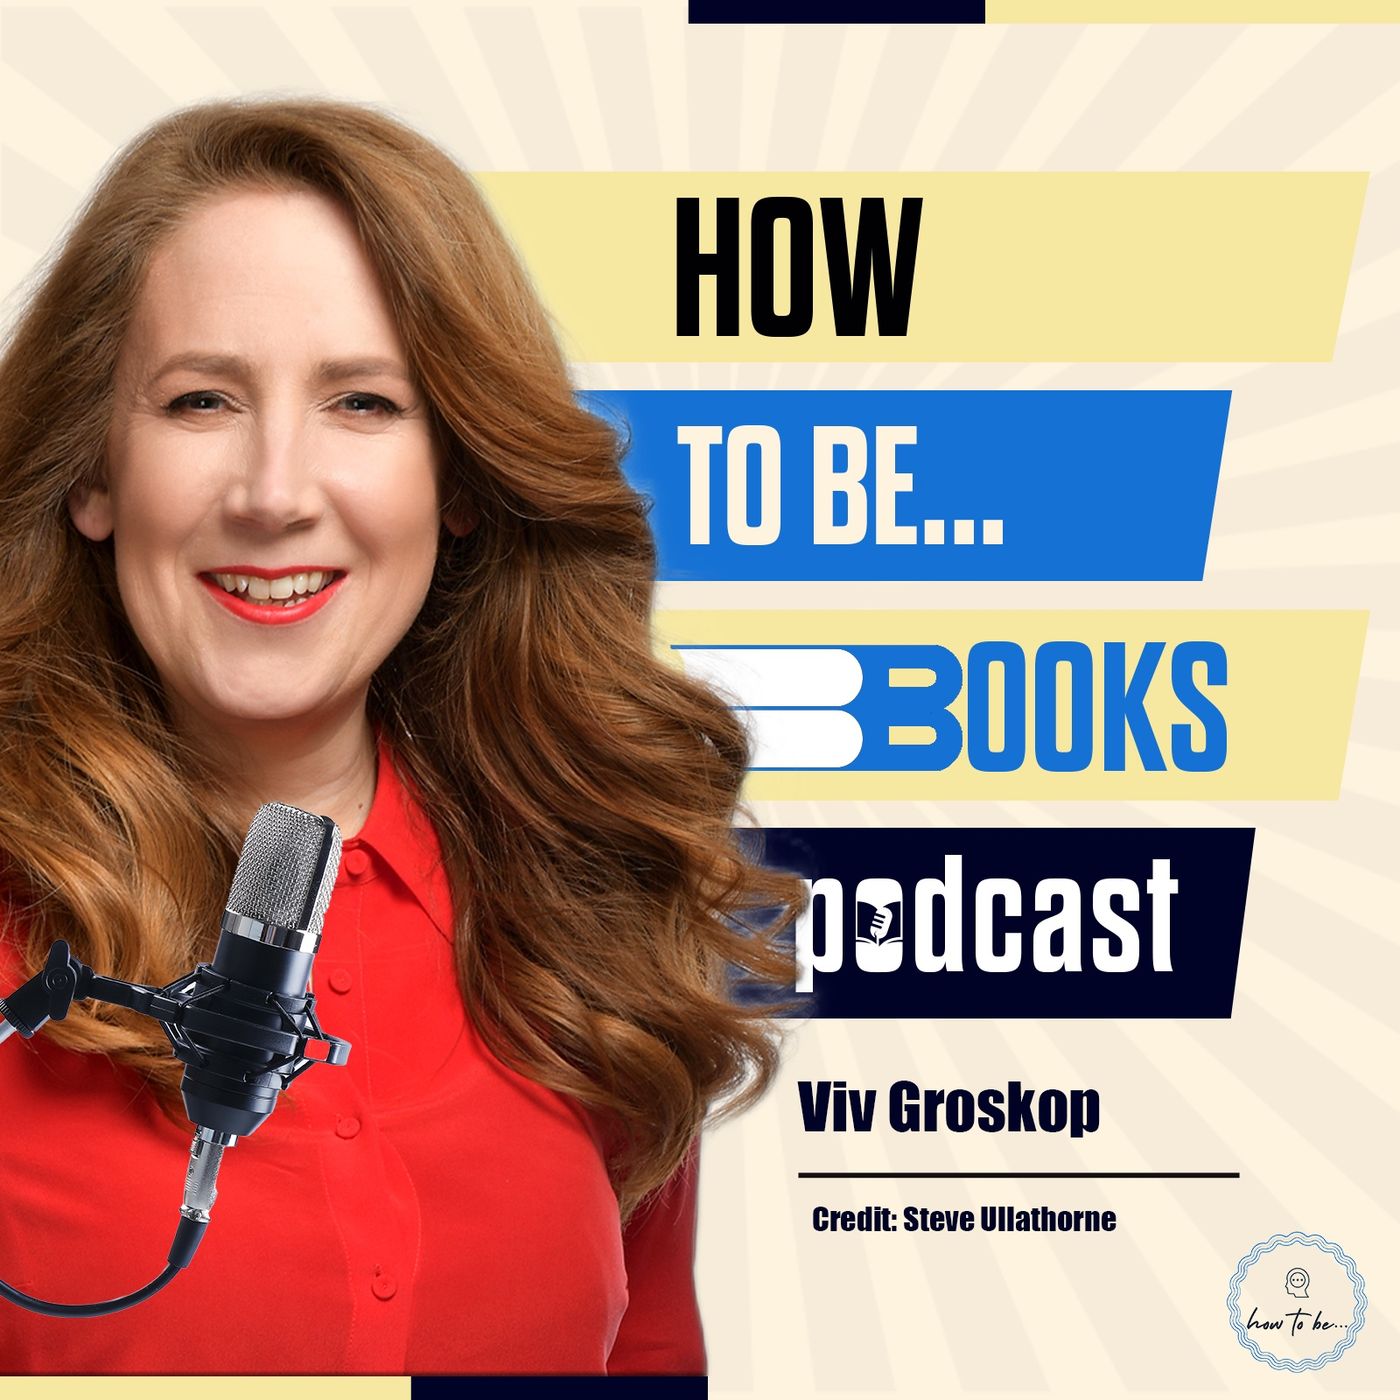 How to be effortlessly confident - with Happy High Status author Viv Groskop